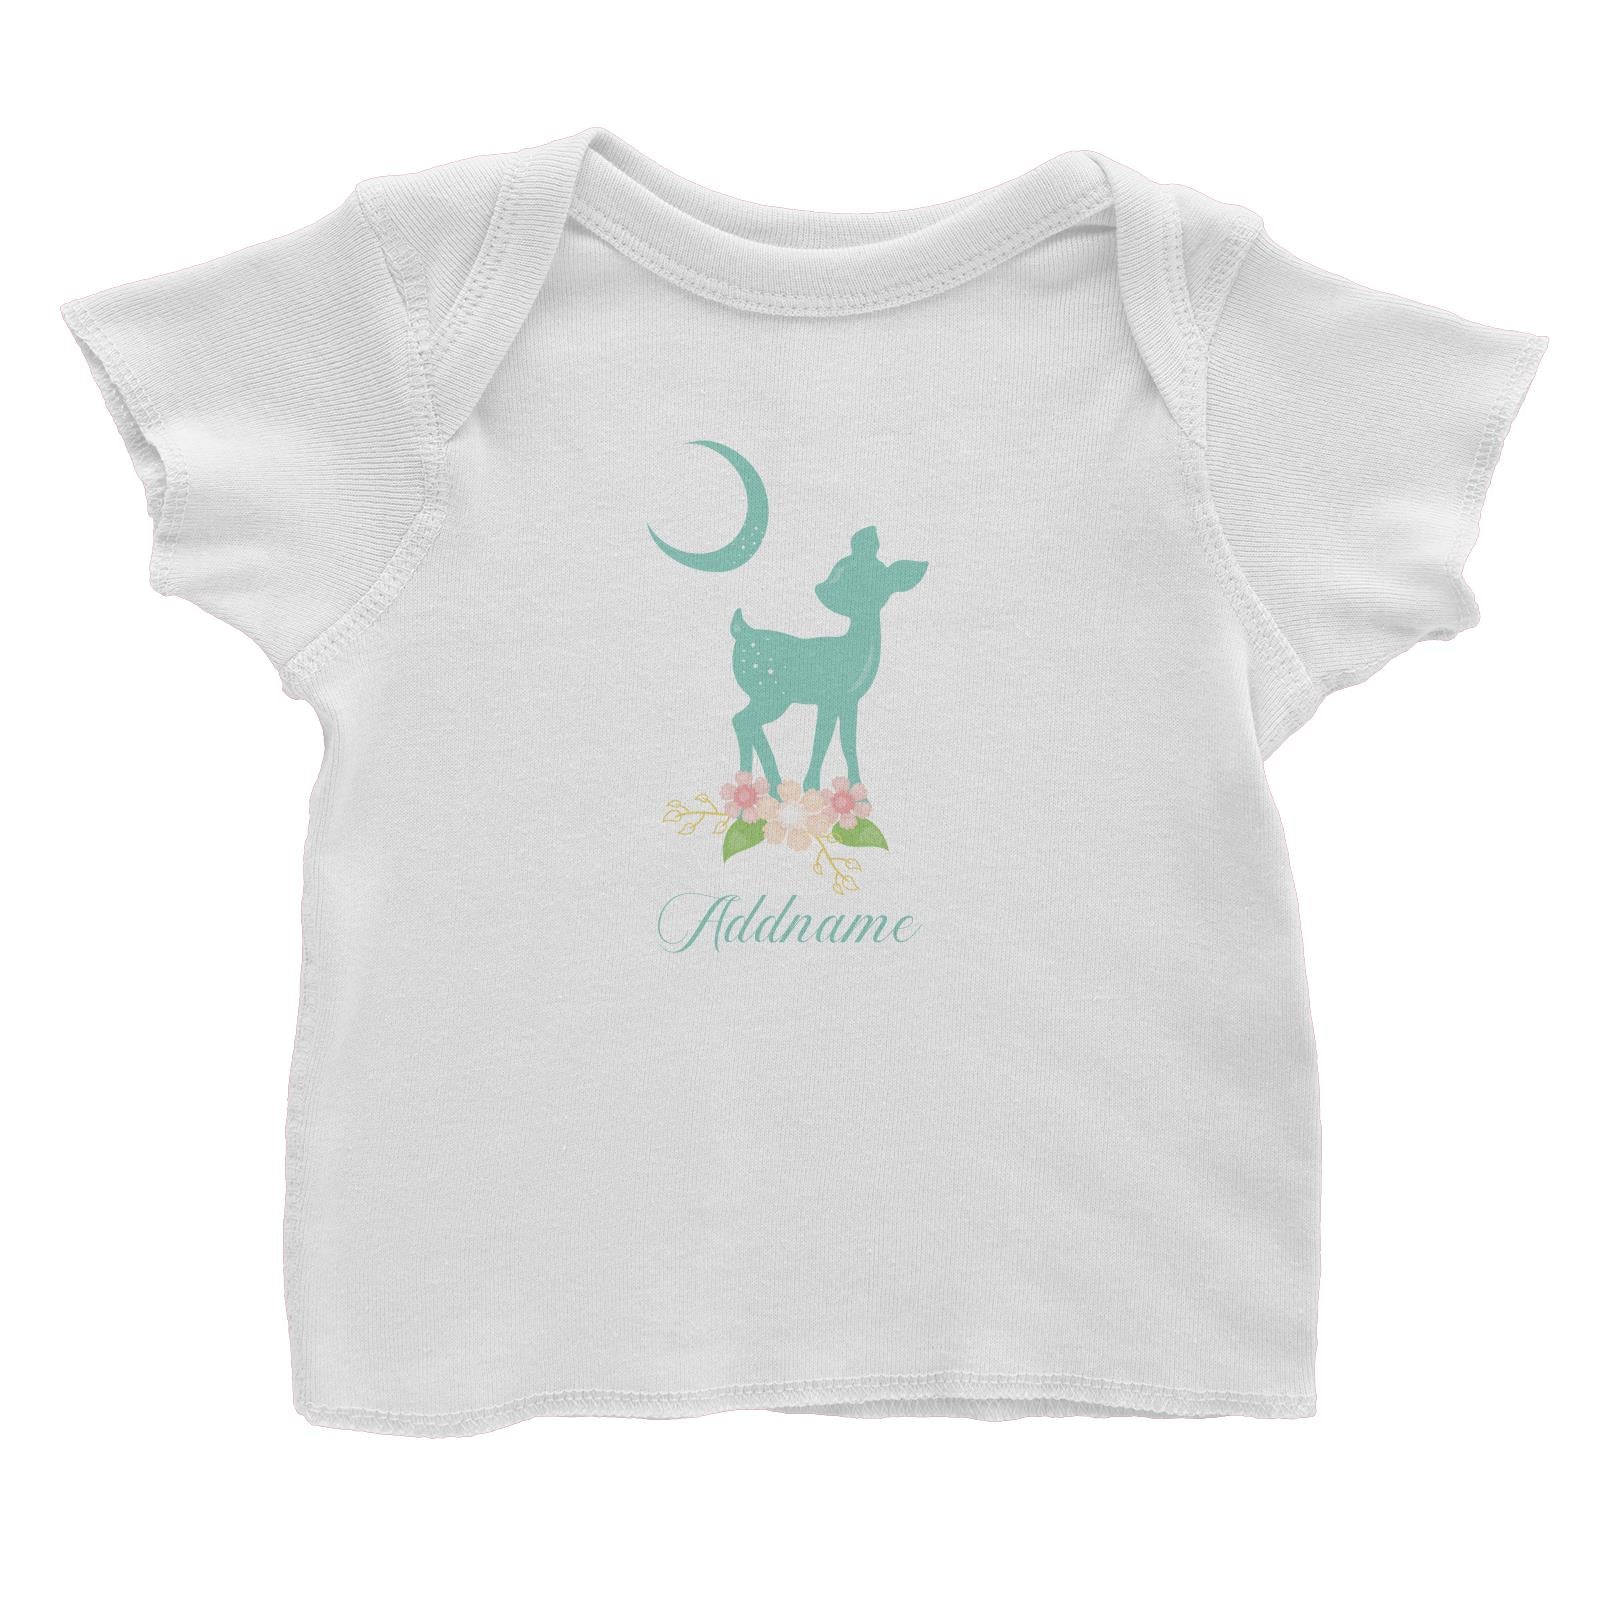 Basic Family Series Pastel Deer Green Fawn With Flower Addname Baby T-Shirt